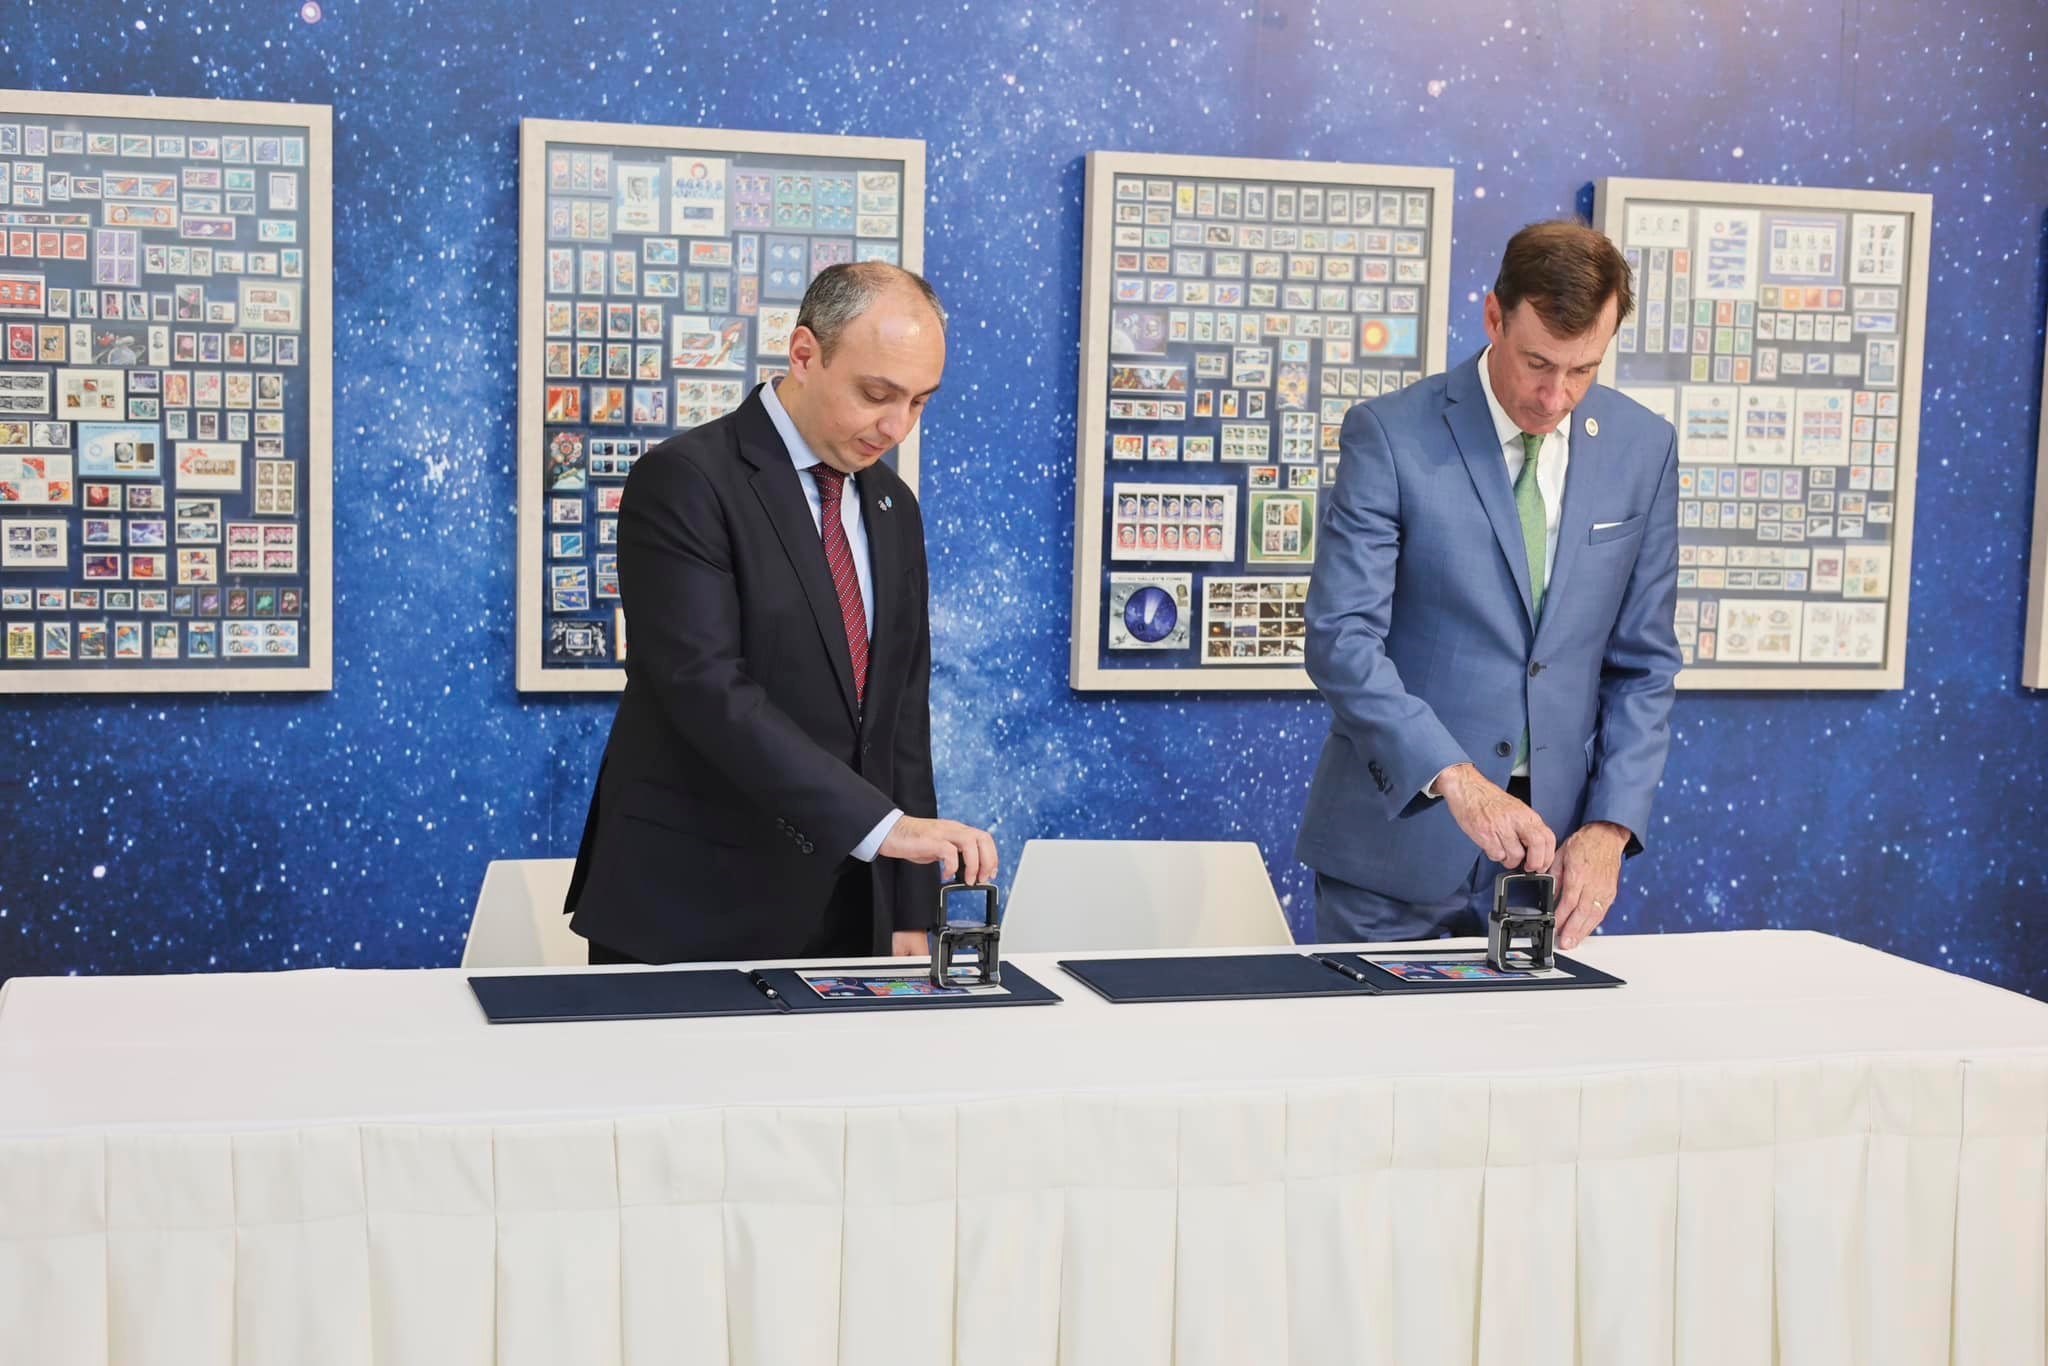 A sealing ceremony for postage stamps dedicated to the 74th International Astronautical Congress held in Baku has taken place